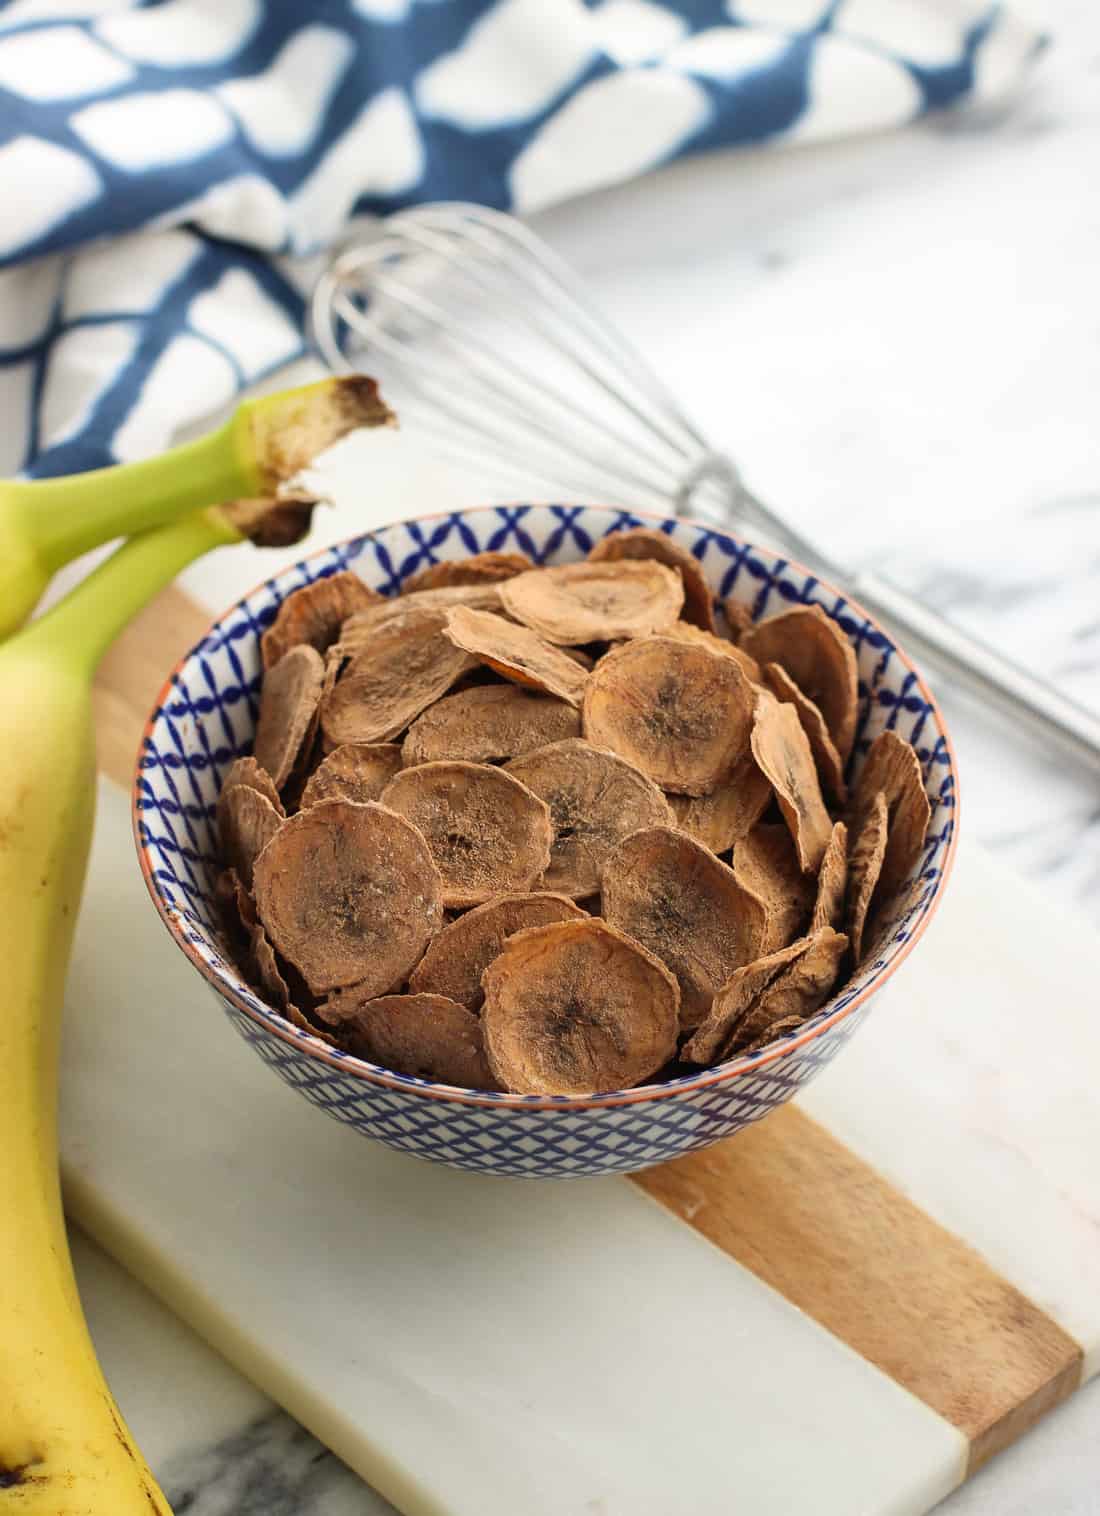 A small ceramic bowl filled with banana chips next to fresh bananas and a small whisk